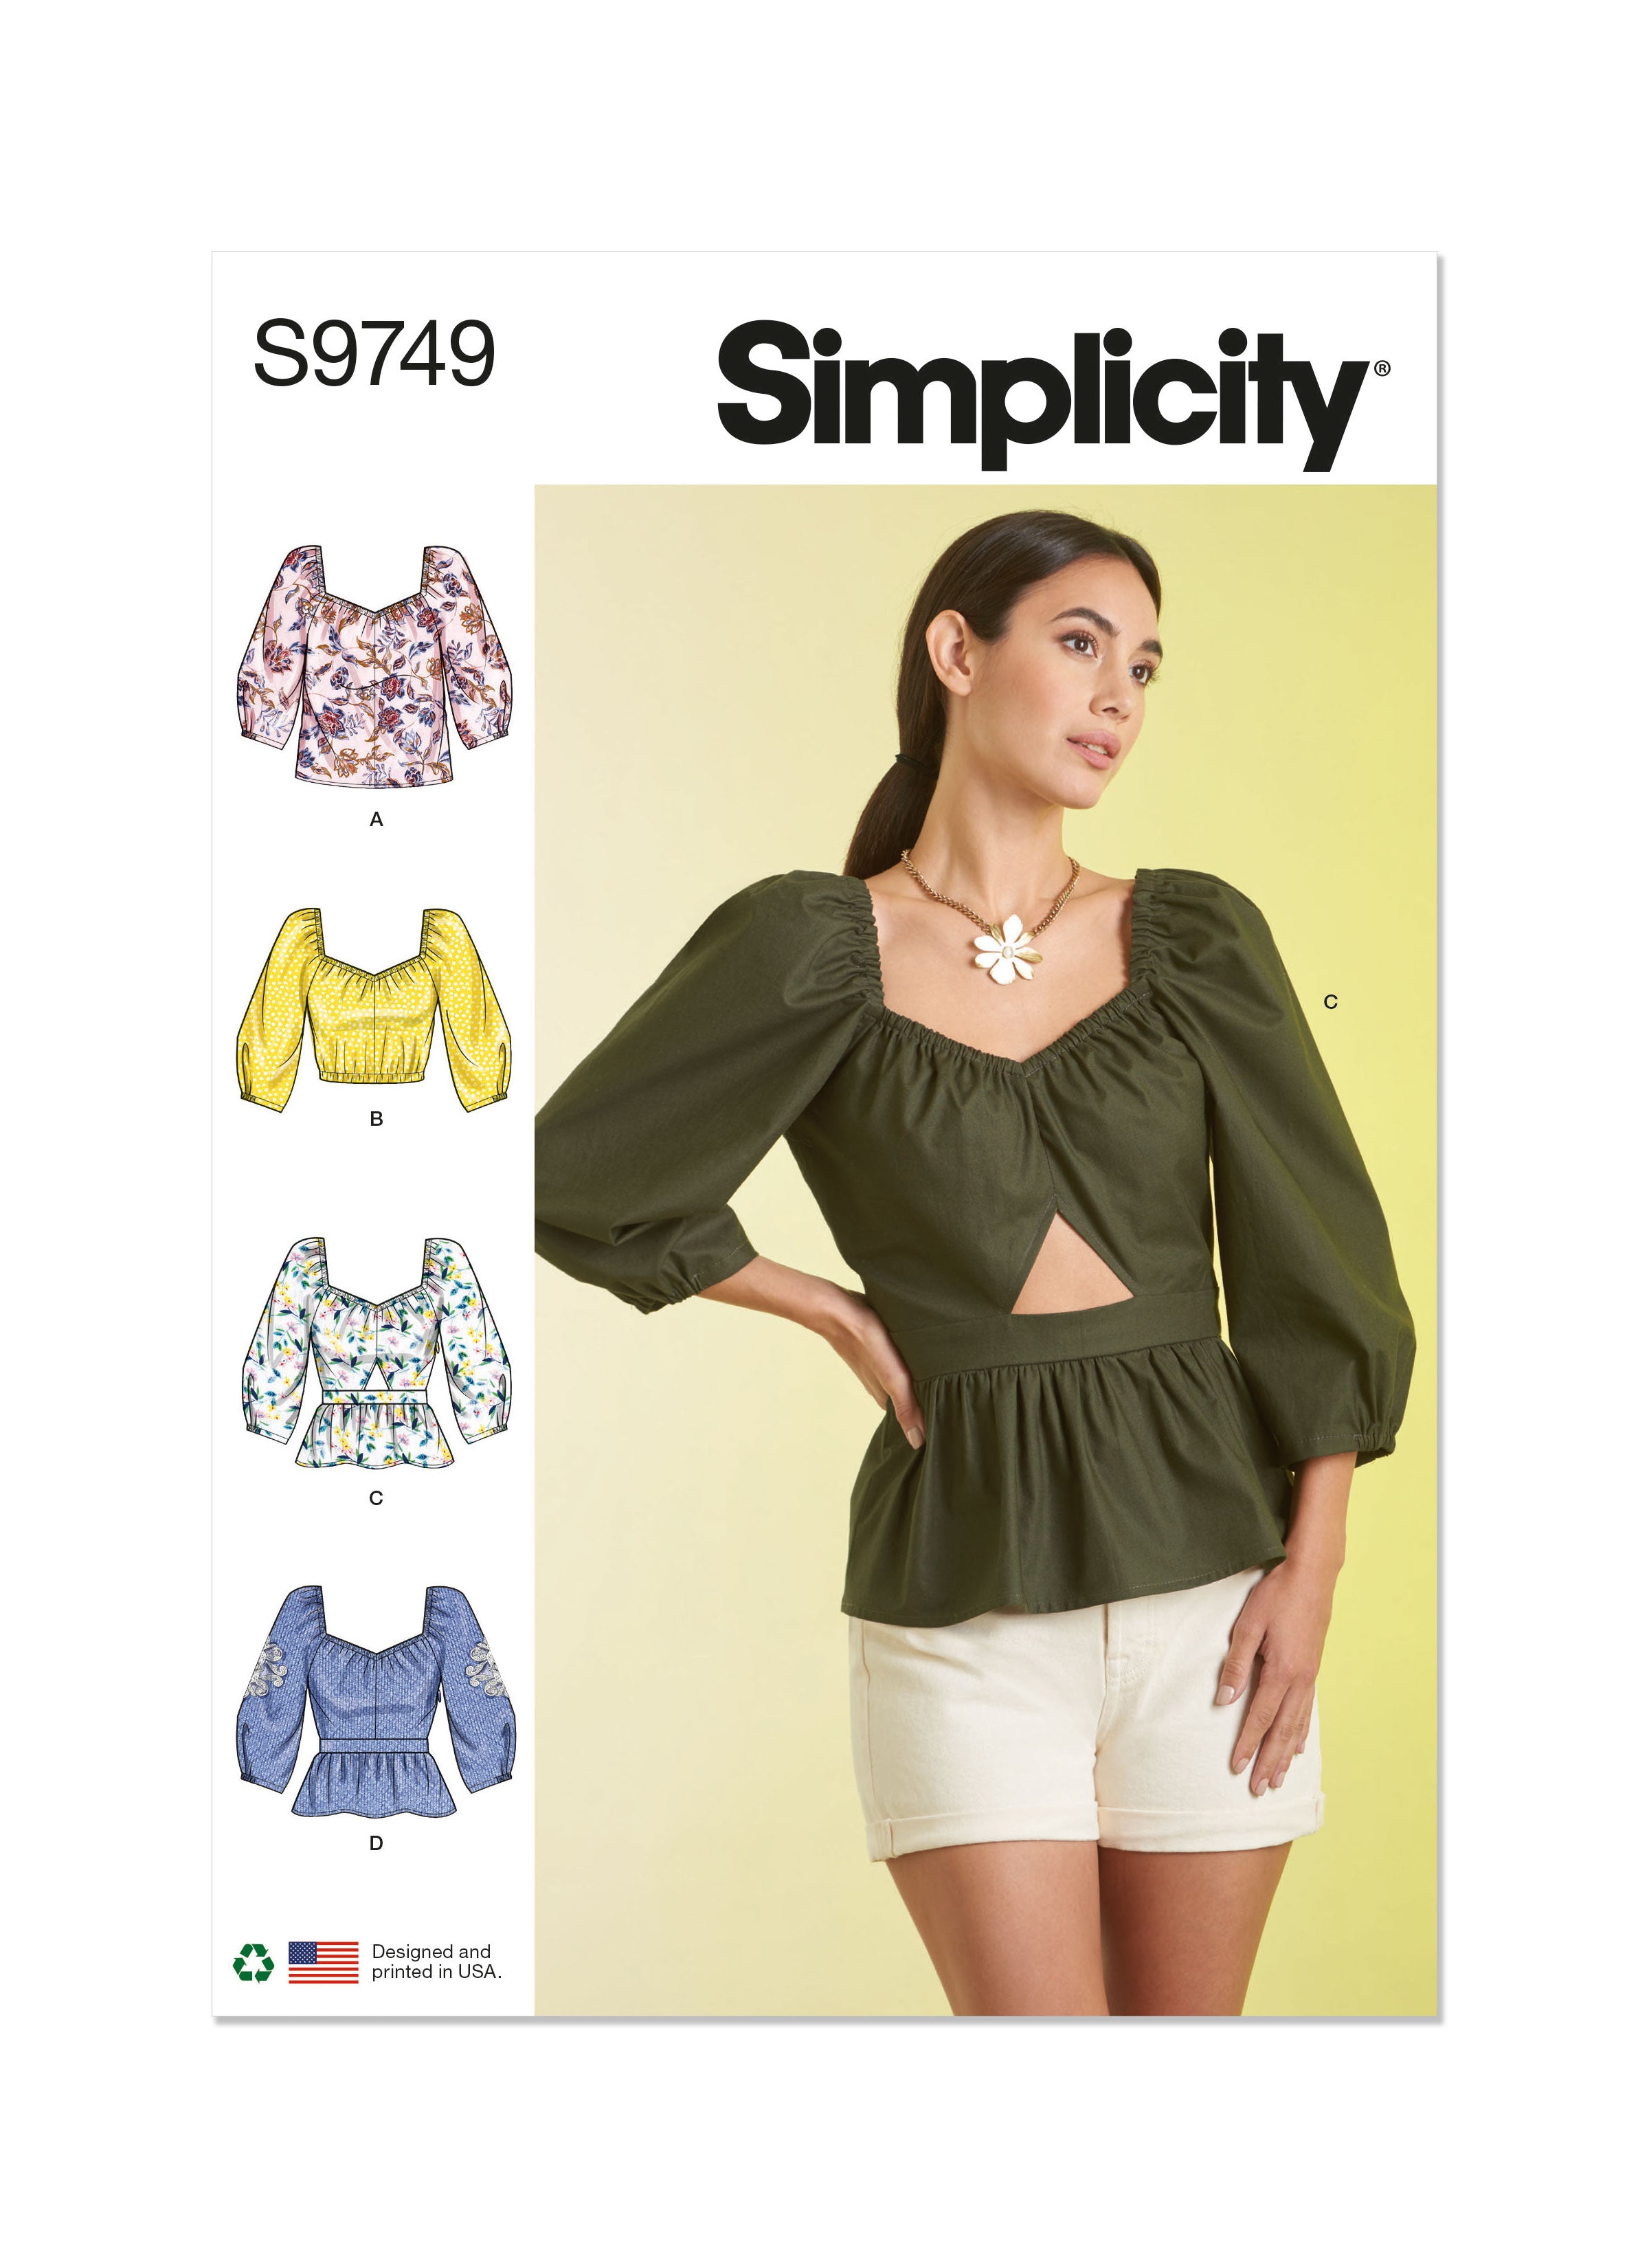 Simplicity 9749 sewing pattern Misses' Tops from Jaycotts Sewing Supplies